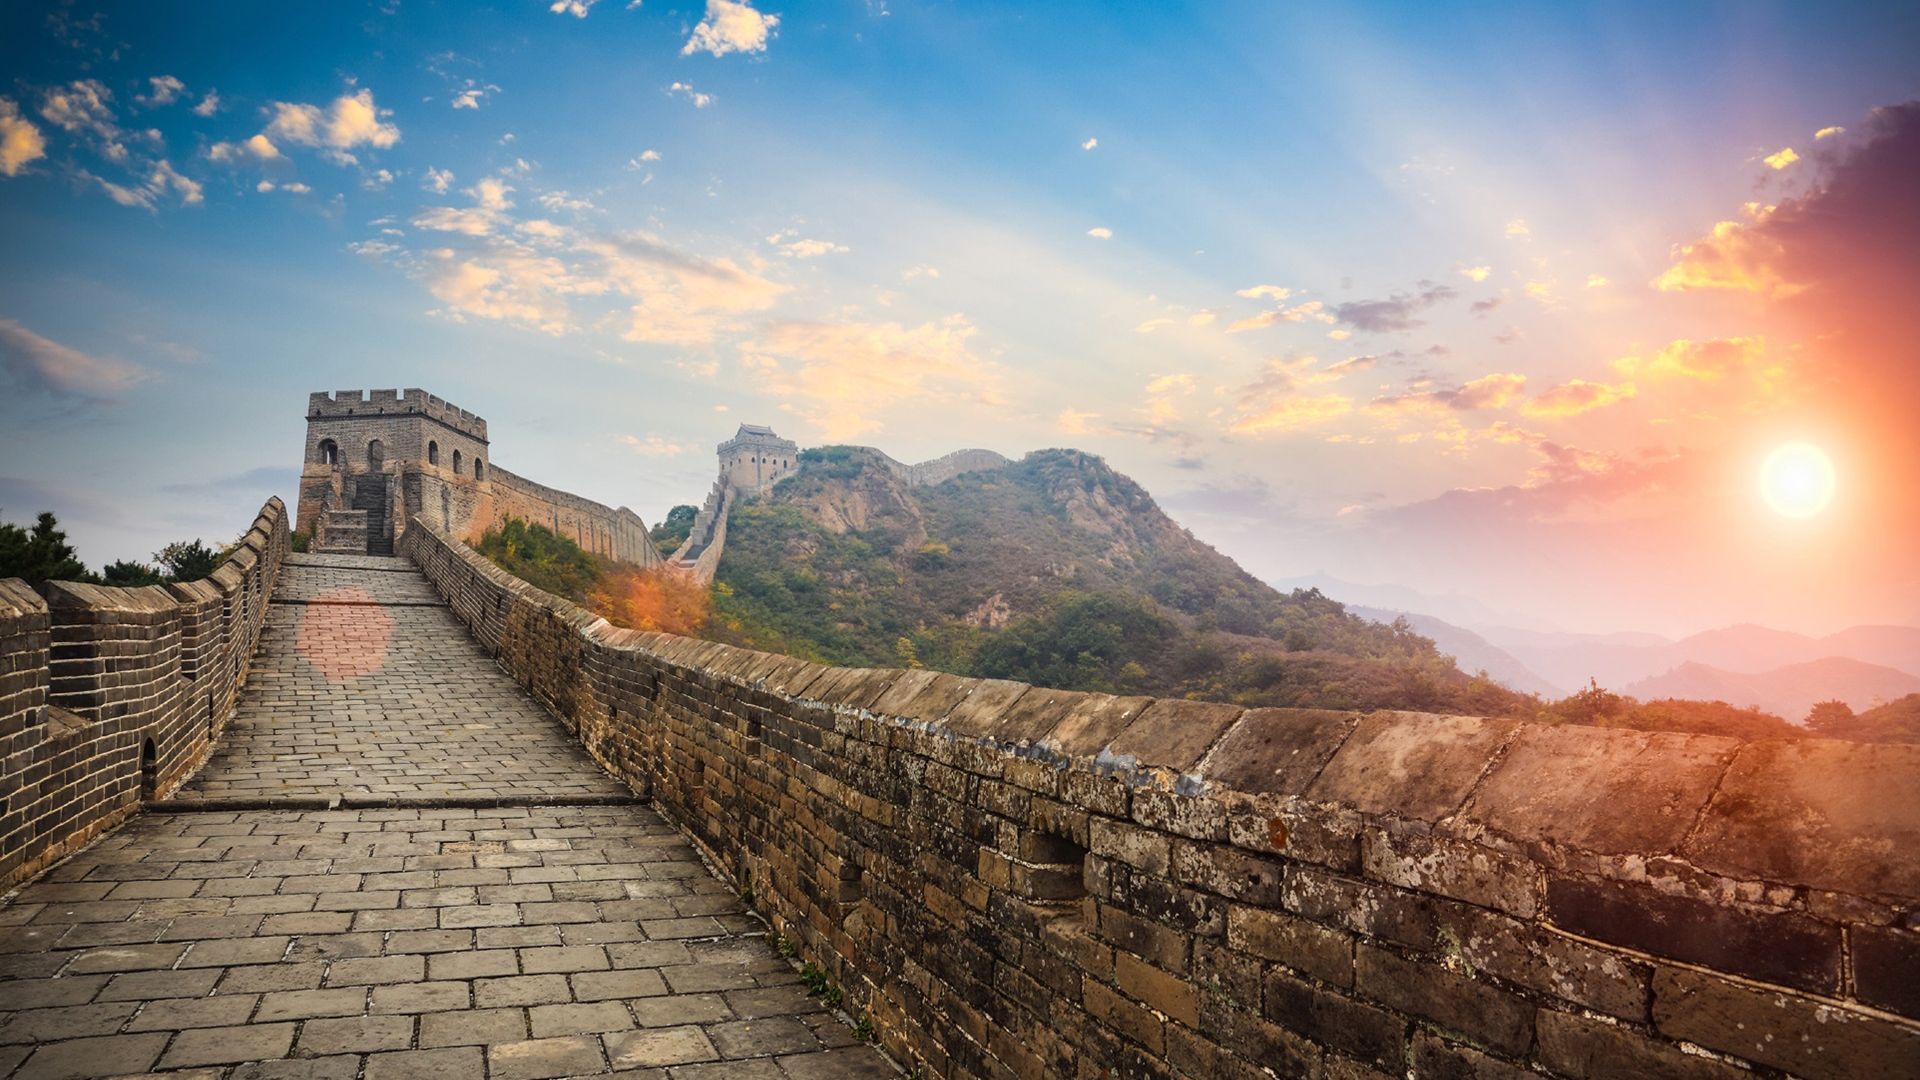 Desktop Wallpaper Great Wall Of China, Hd Image, Picture, Background, K Gkdf